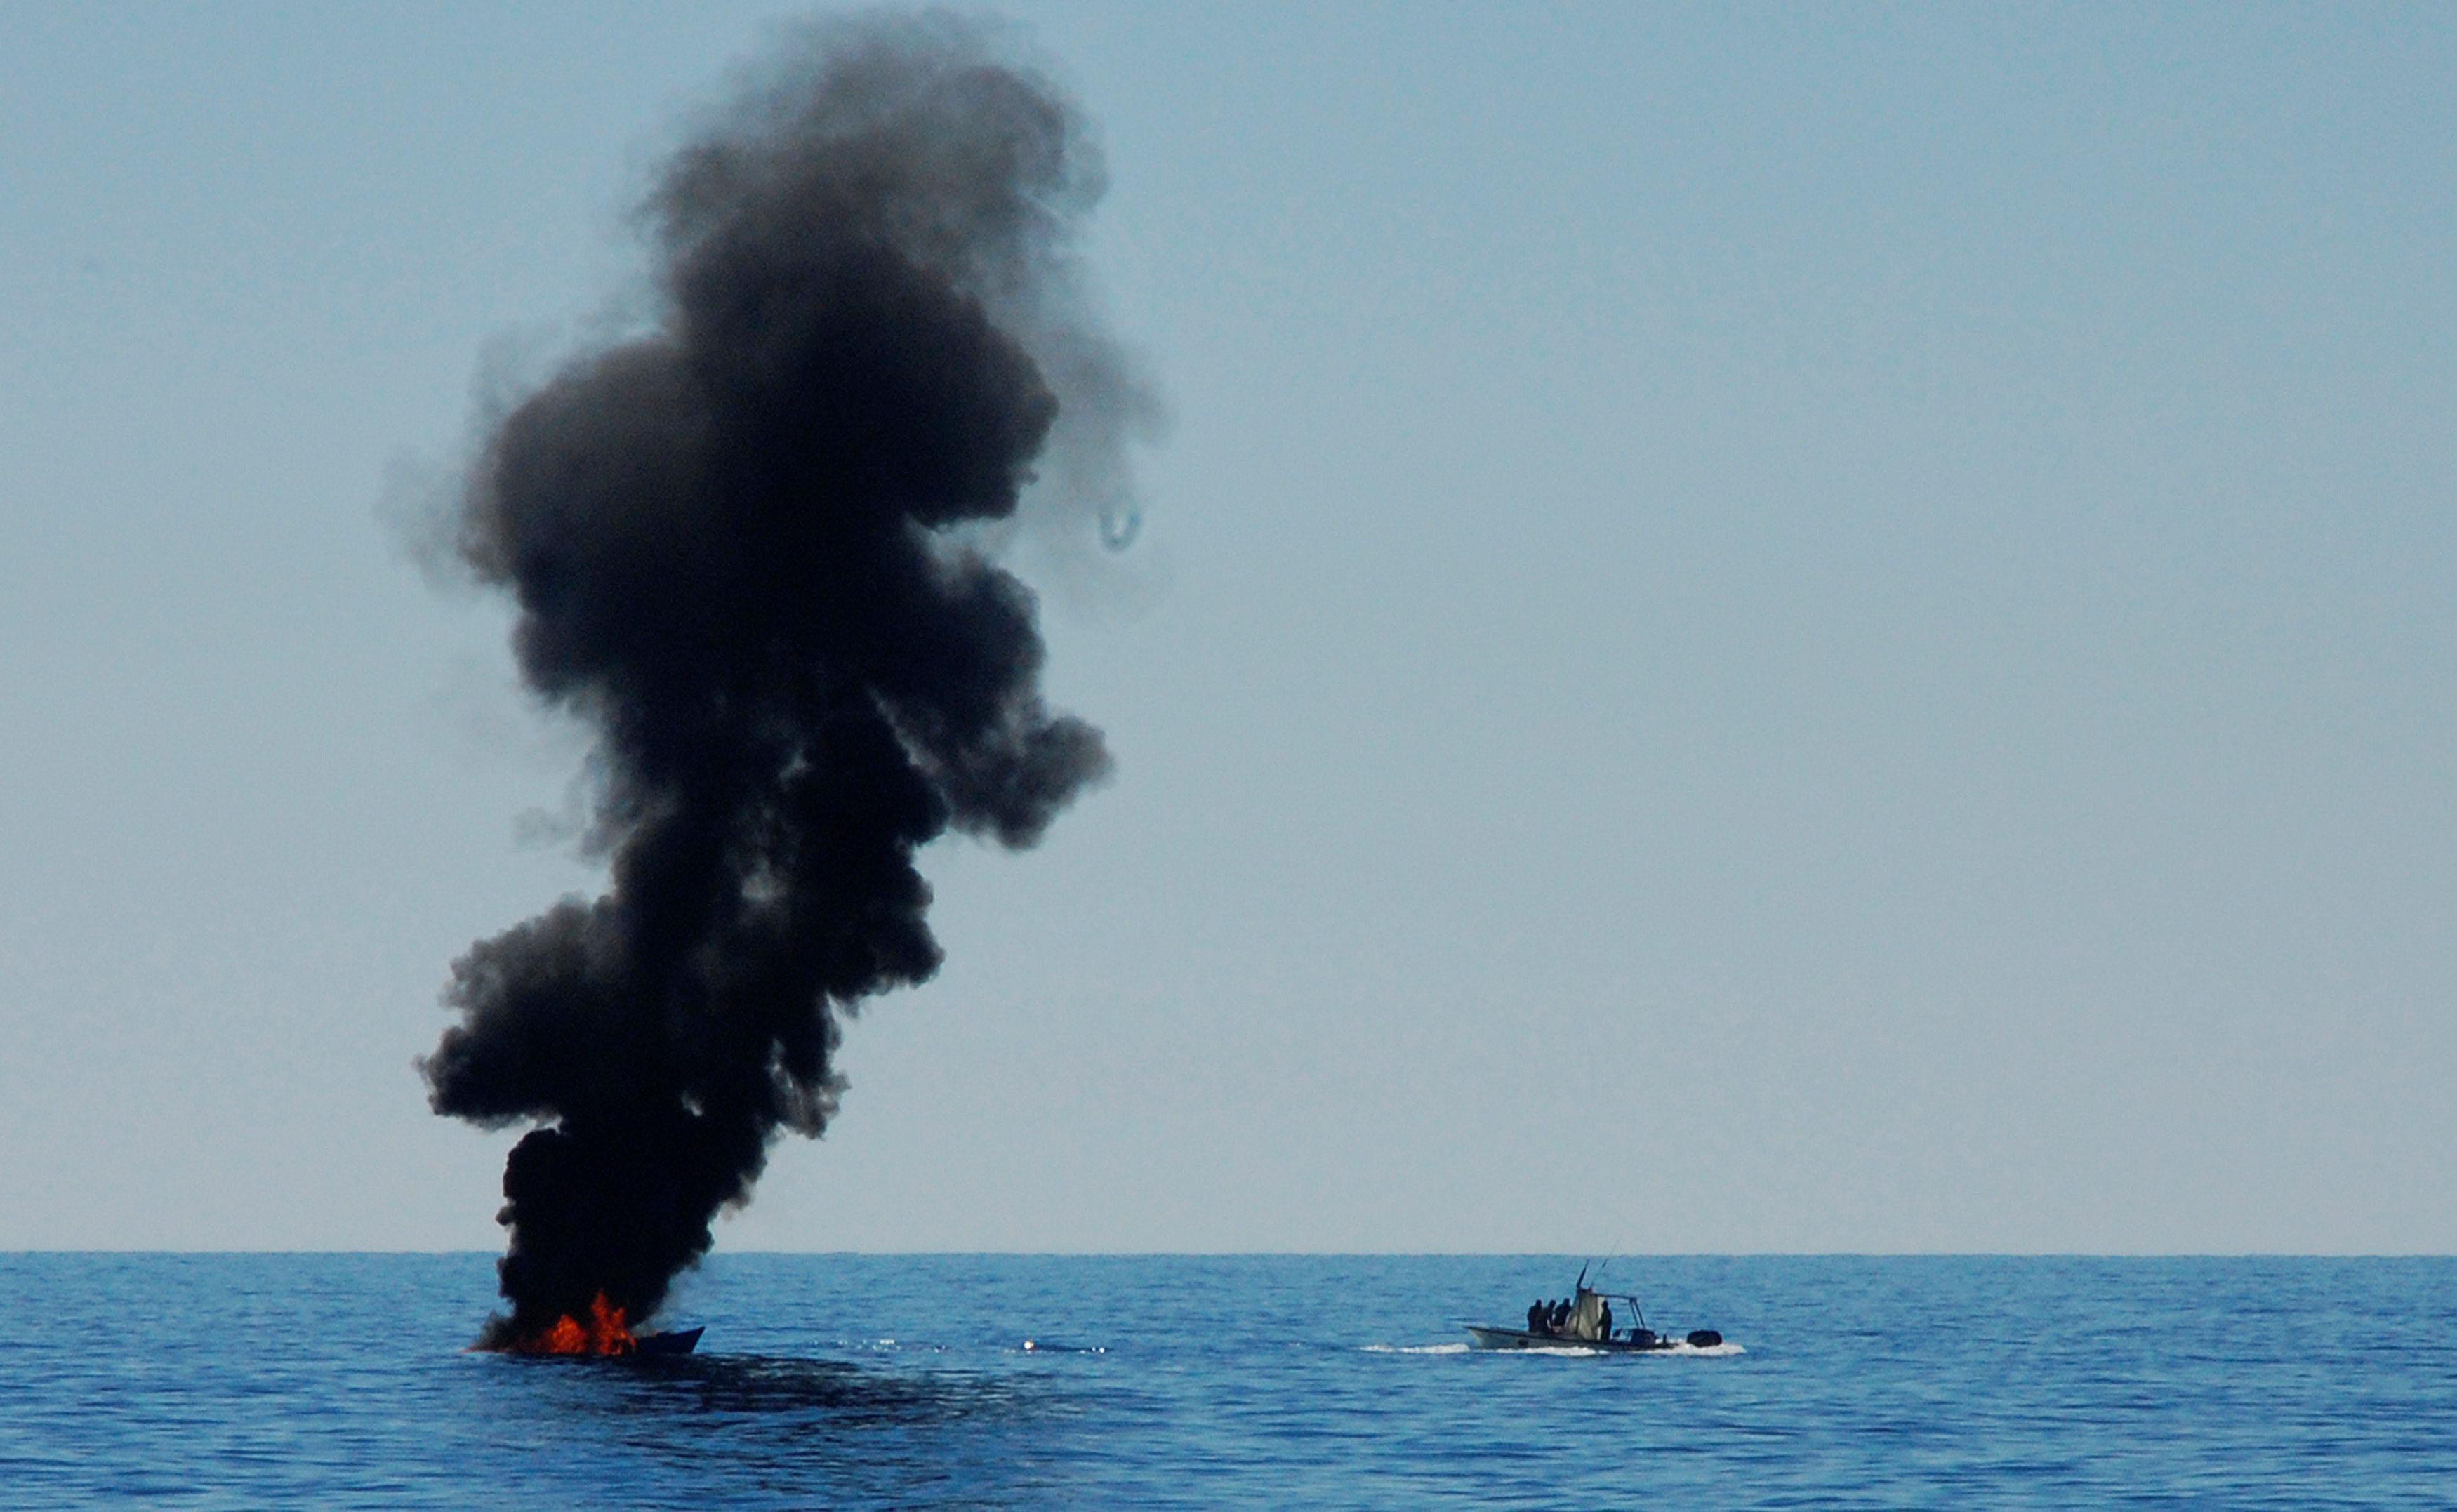 A migrant boat is set on fire by the Libyan coastguard after NGO ships rescued the migrants about 20